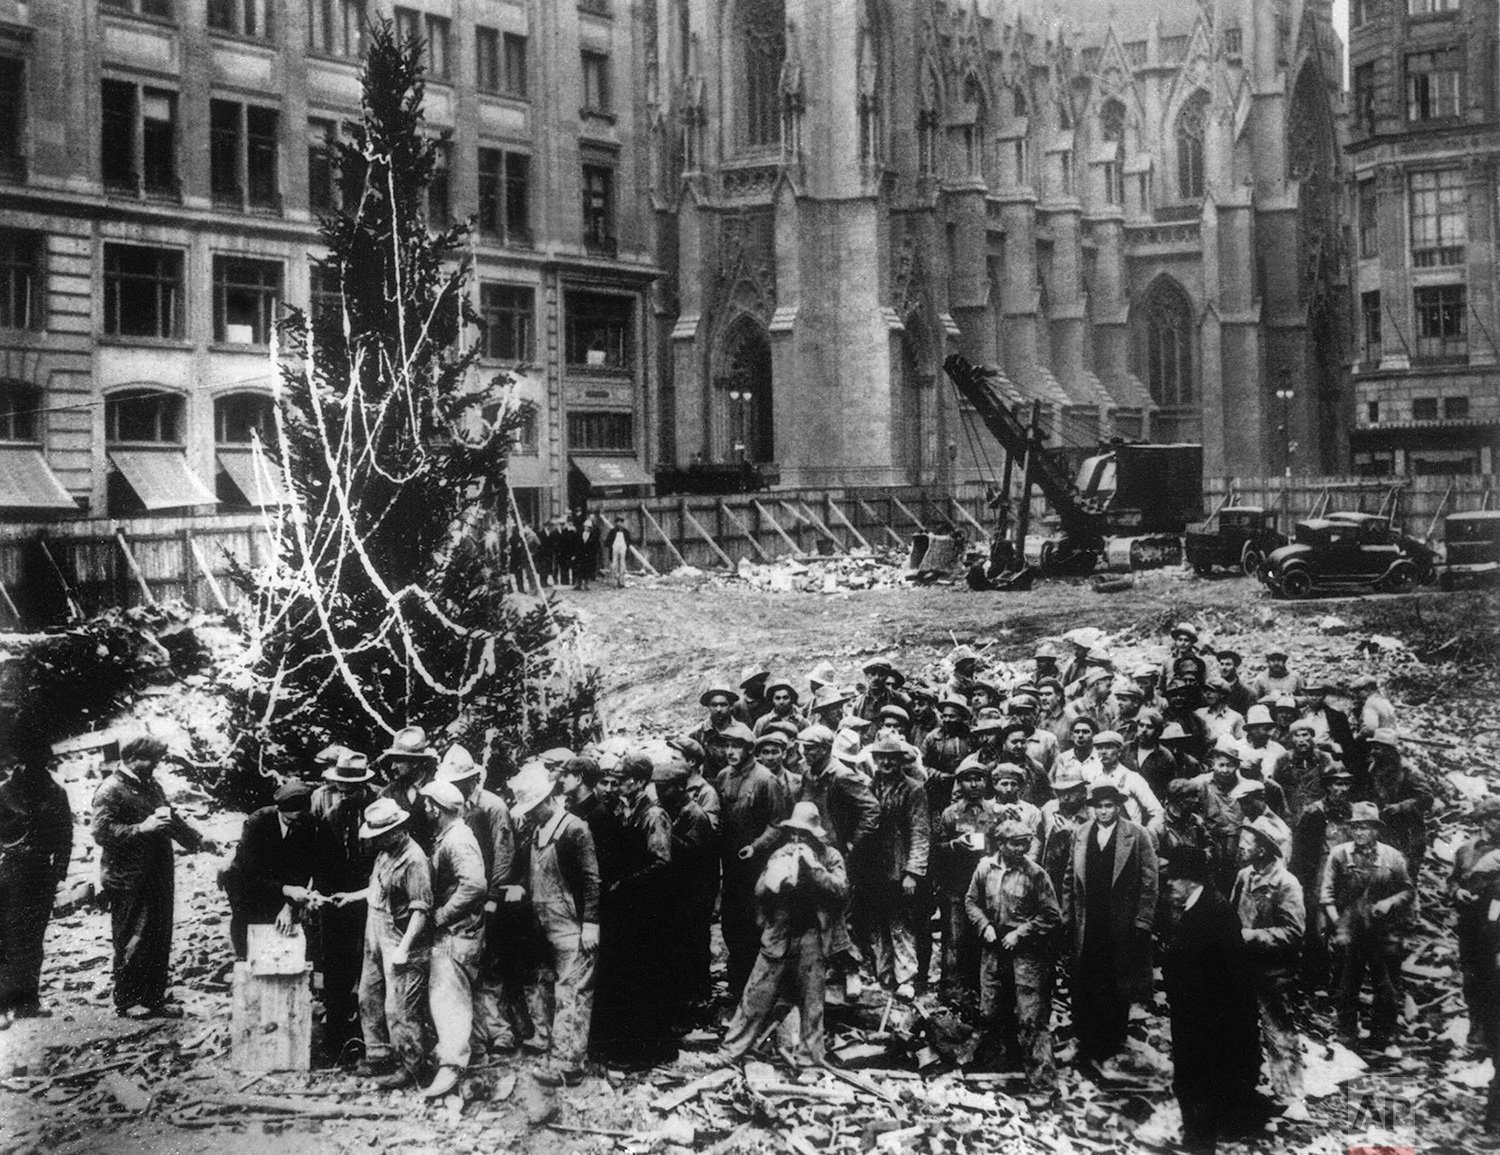  Construction workers line up for pay beside the first Rockefeller Center Christmas tree in New York in 1931.  The Christmas tree went on to become an annual tradition and a New York landmark.  St. Patrick's Cathedral is visible in the background on 